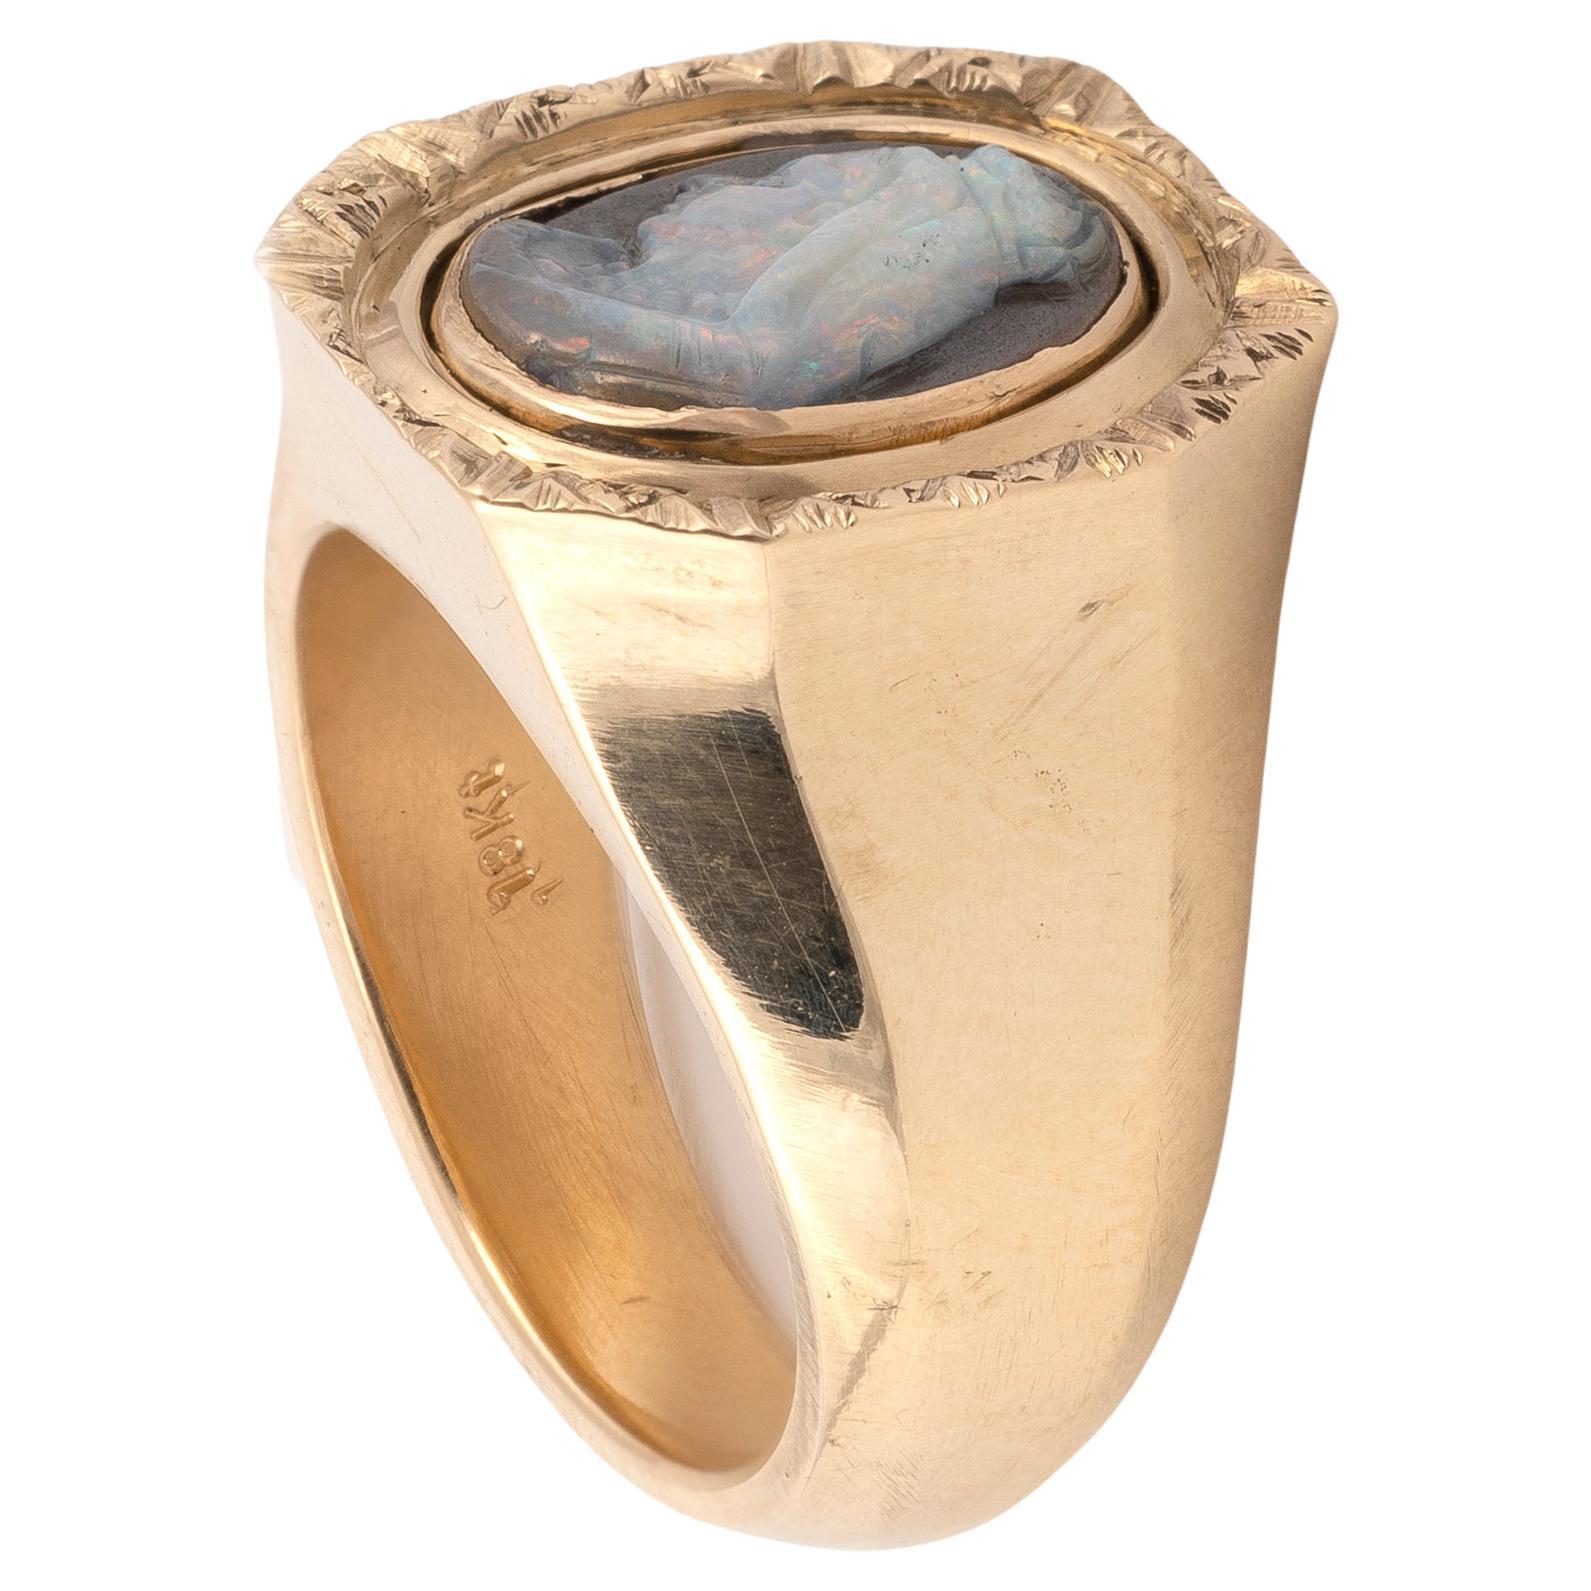 
Probably by Wilhelm Schmidt, mounted in a yellow gold ring, cameo 12mm high.
Size 7